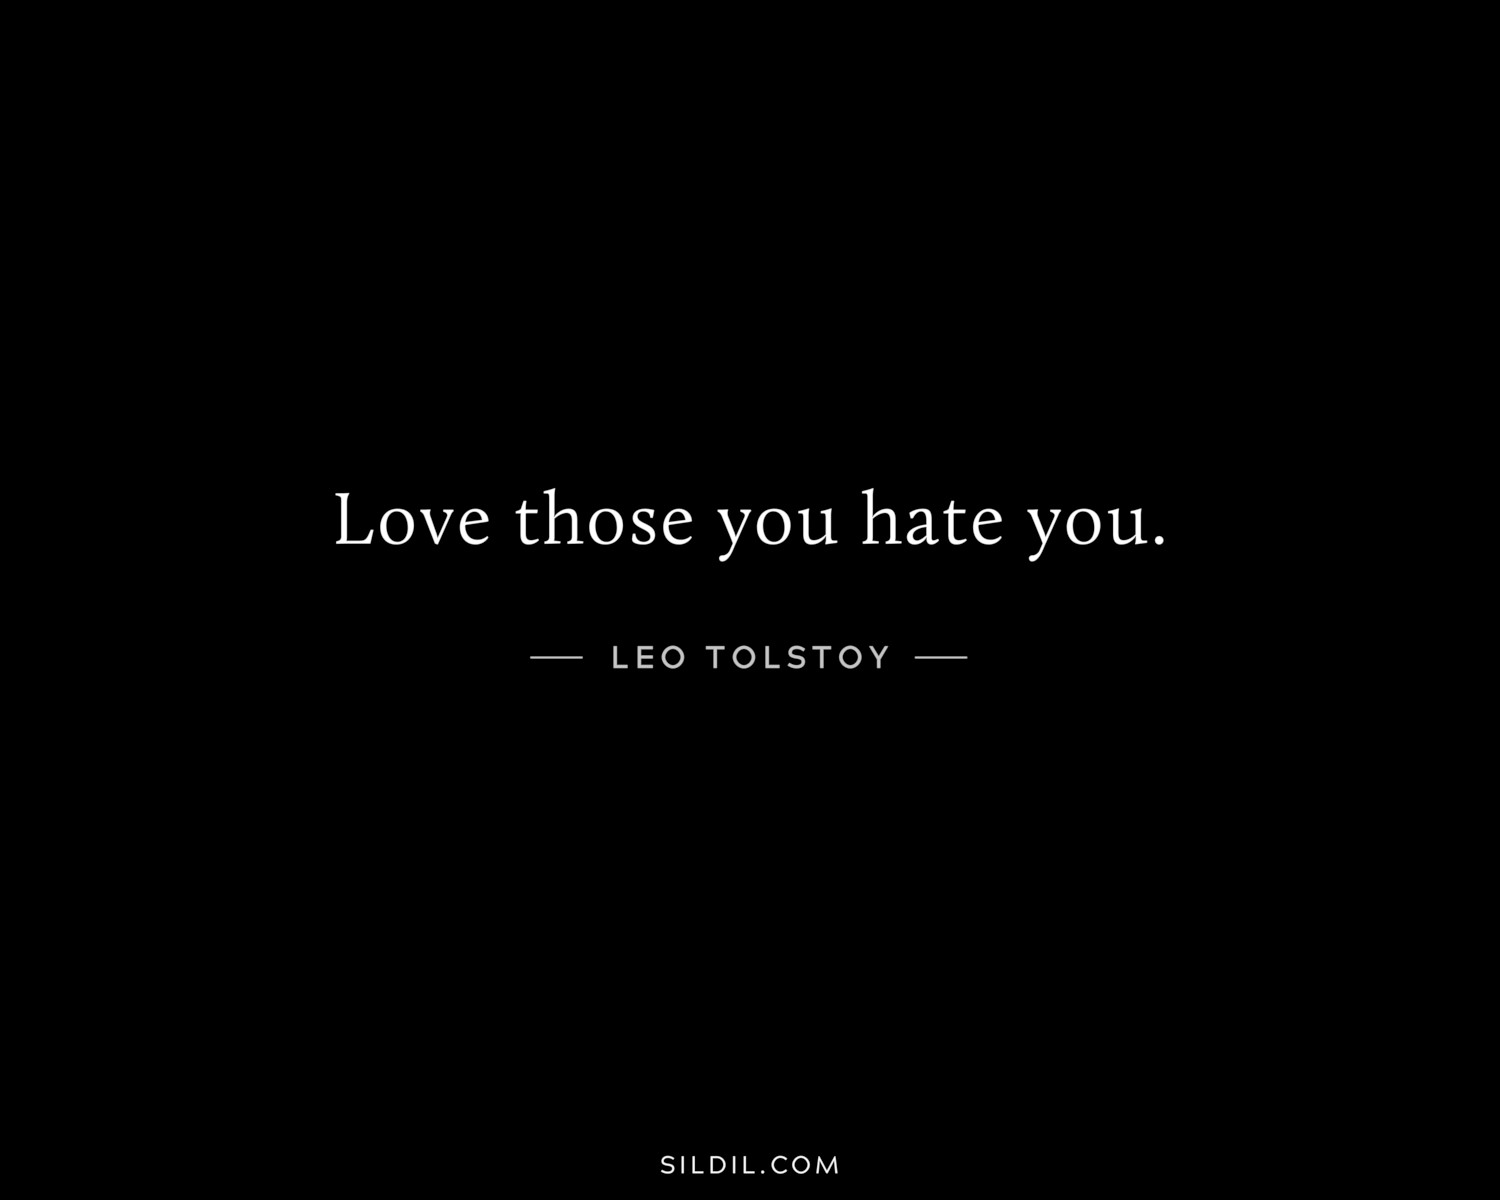 Love those you hate you.